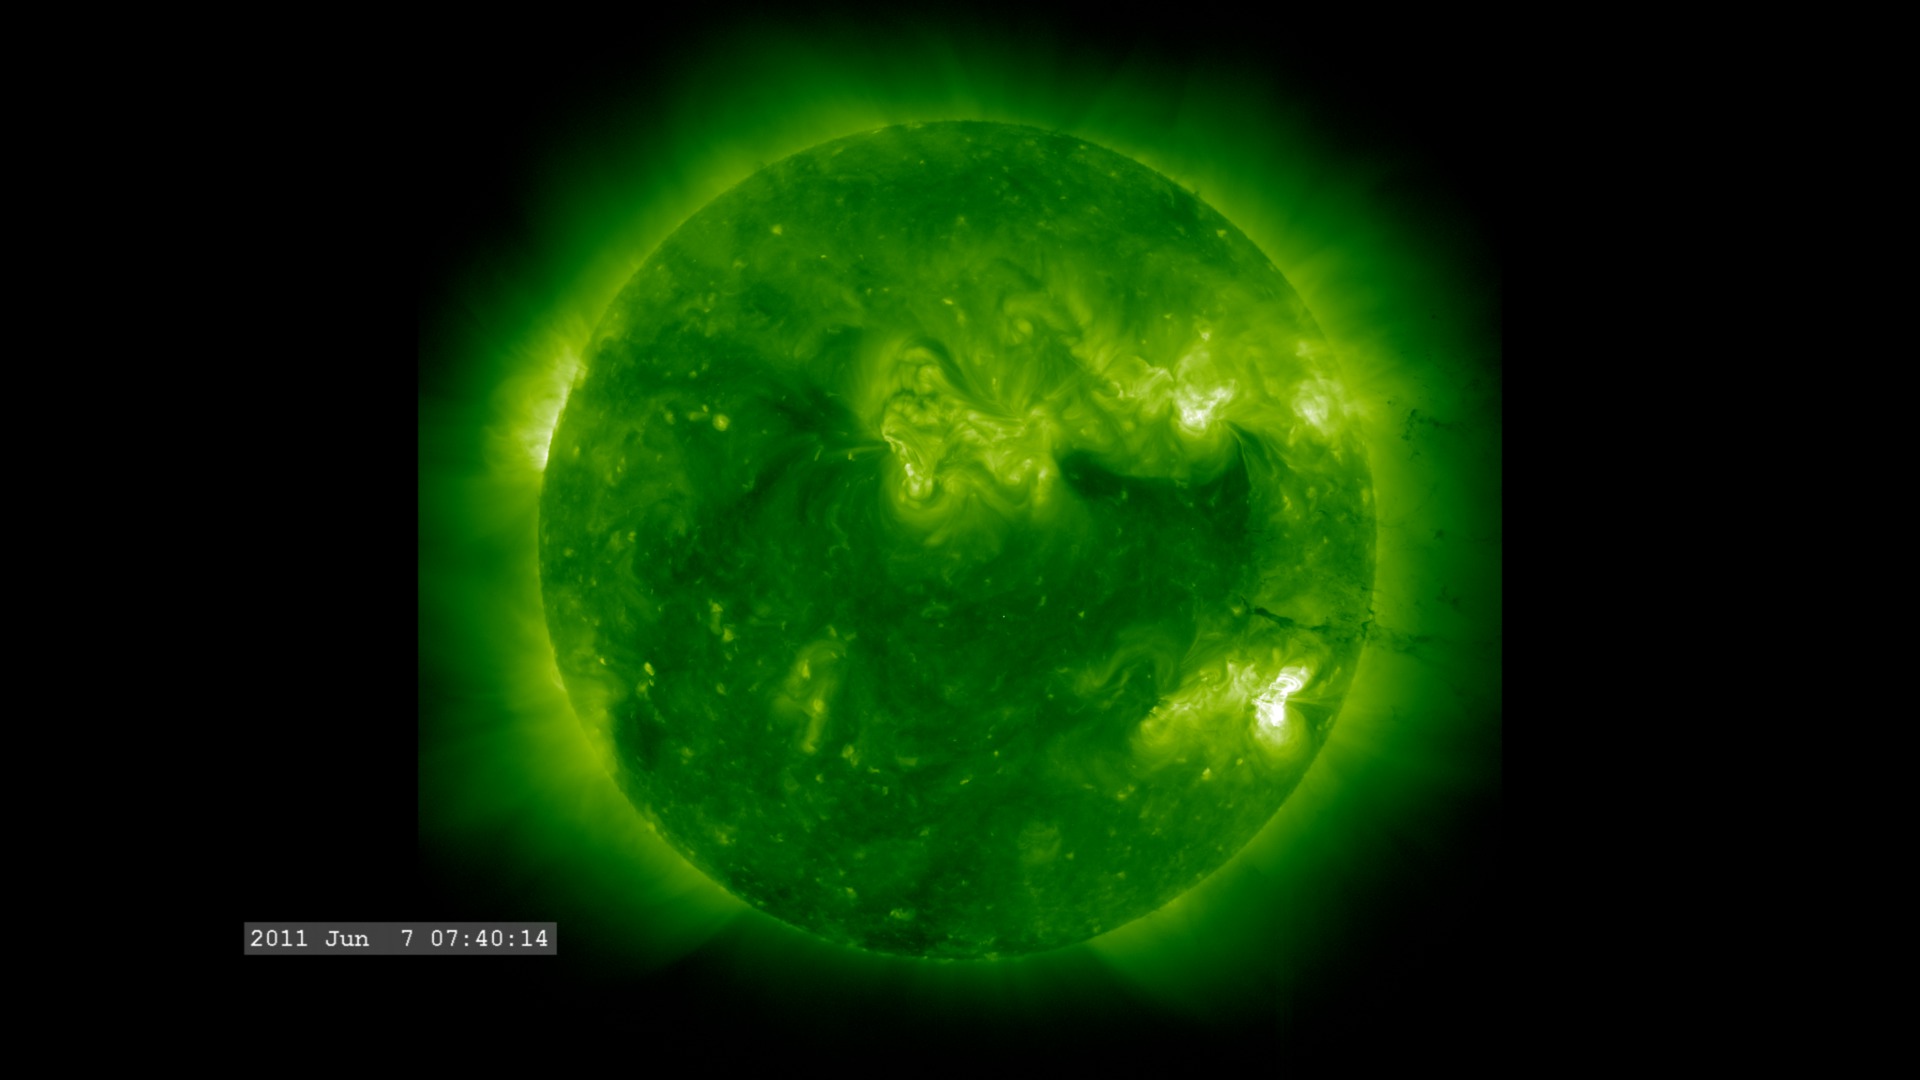 Preview Image for Incredible Solar Flare, Prominence Eruption and CME Event (211 angstroms)